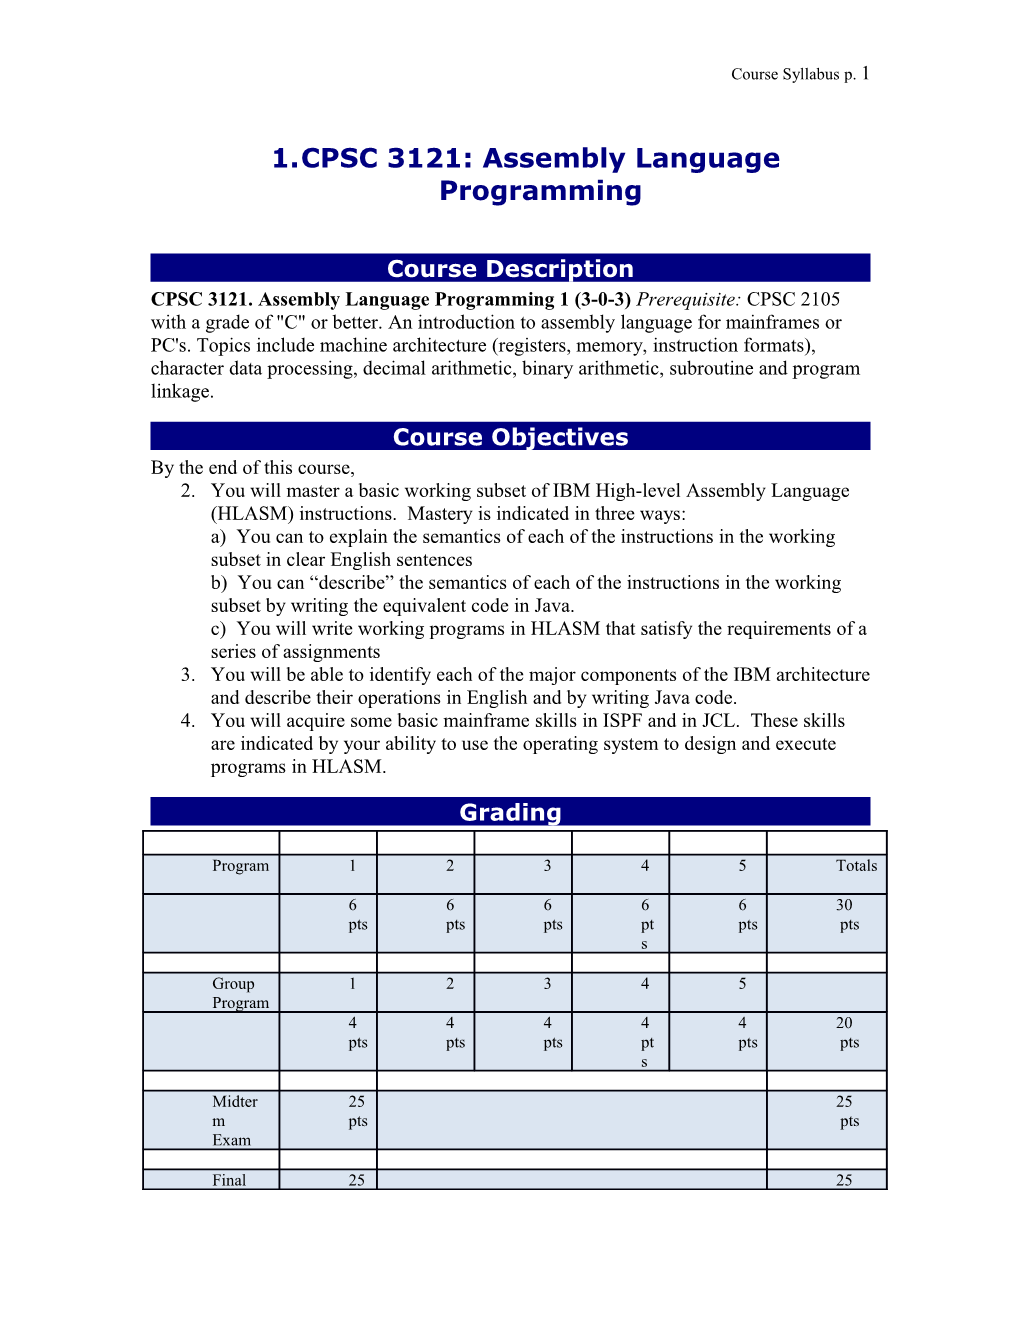 CPSC 3121: Assembly Language Programming